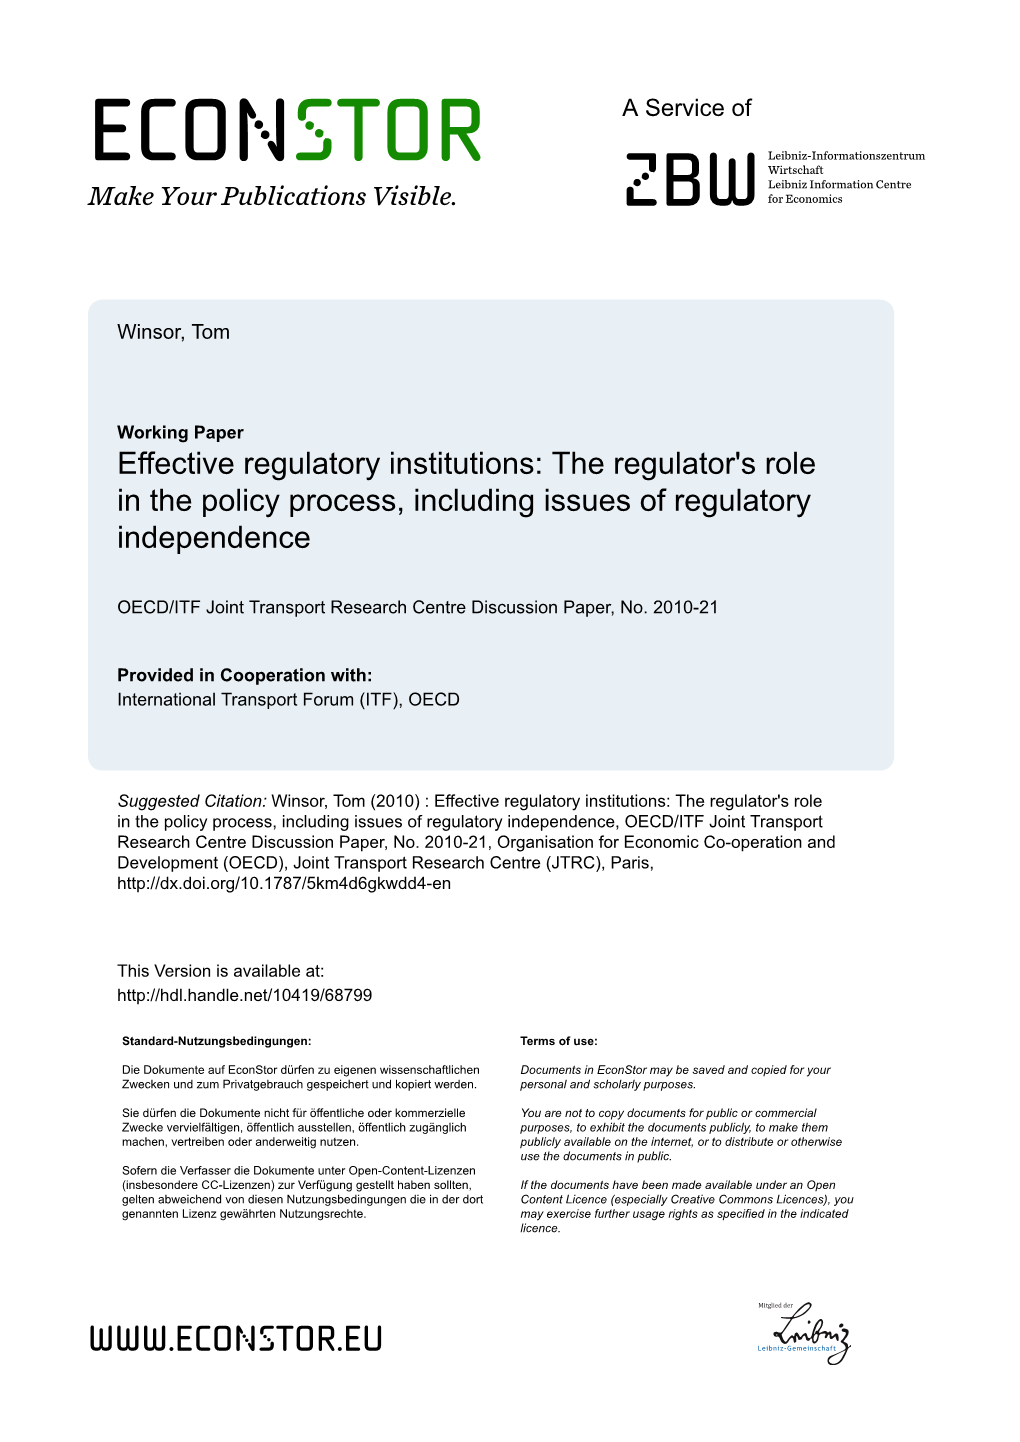 Effective Regulatory Institutions: the Regulator's Role in the Policy Process, Including Issues of Regulatory Independence